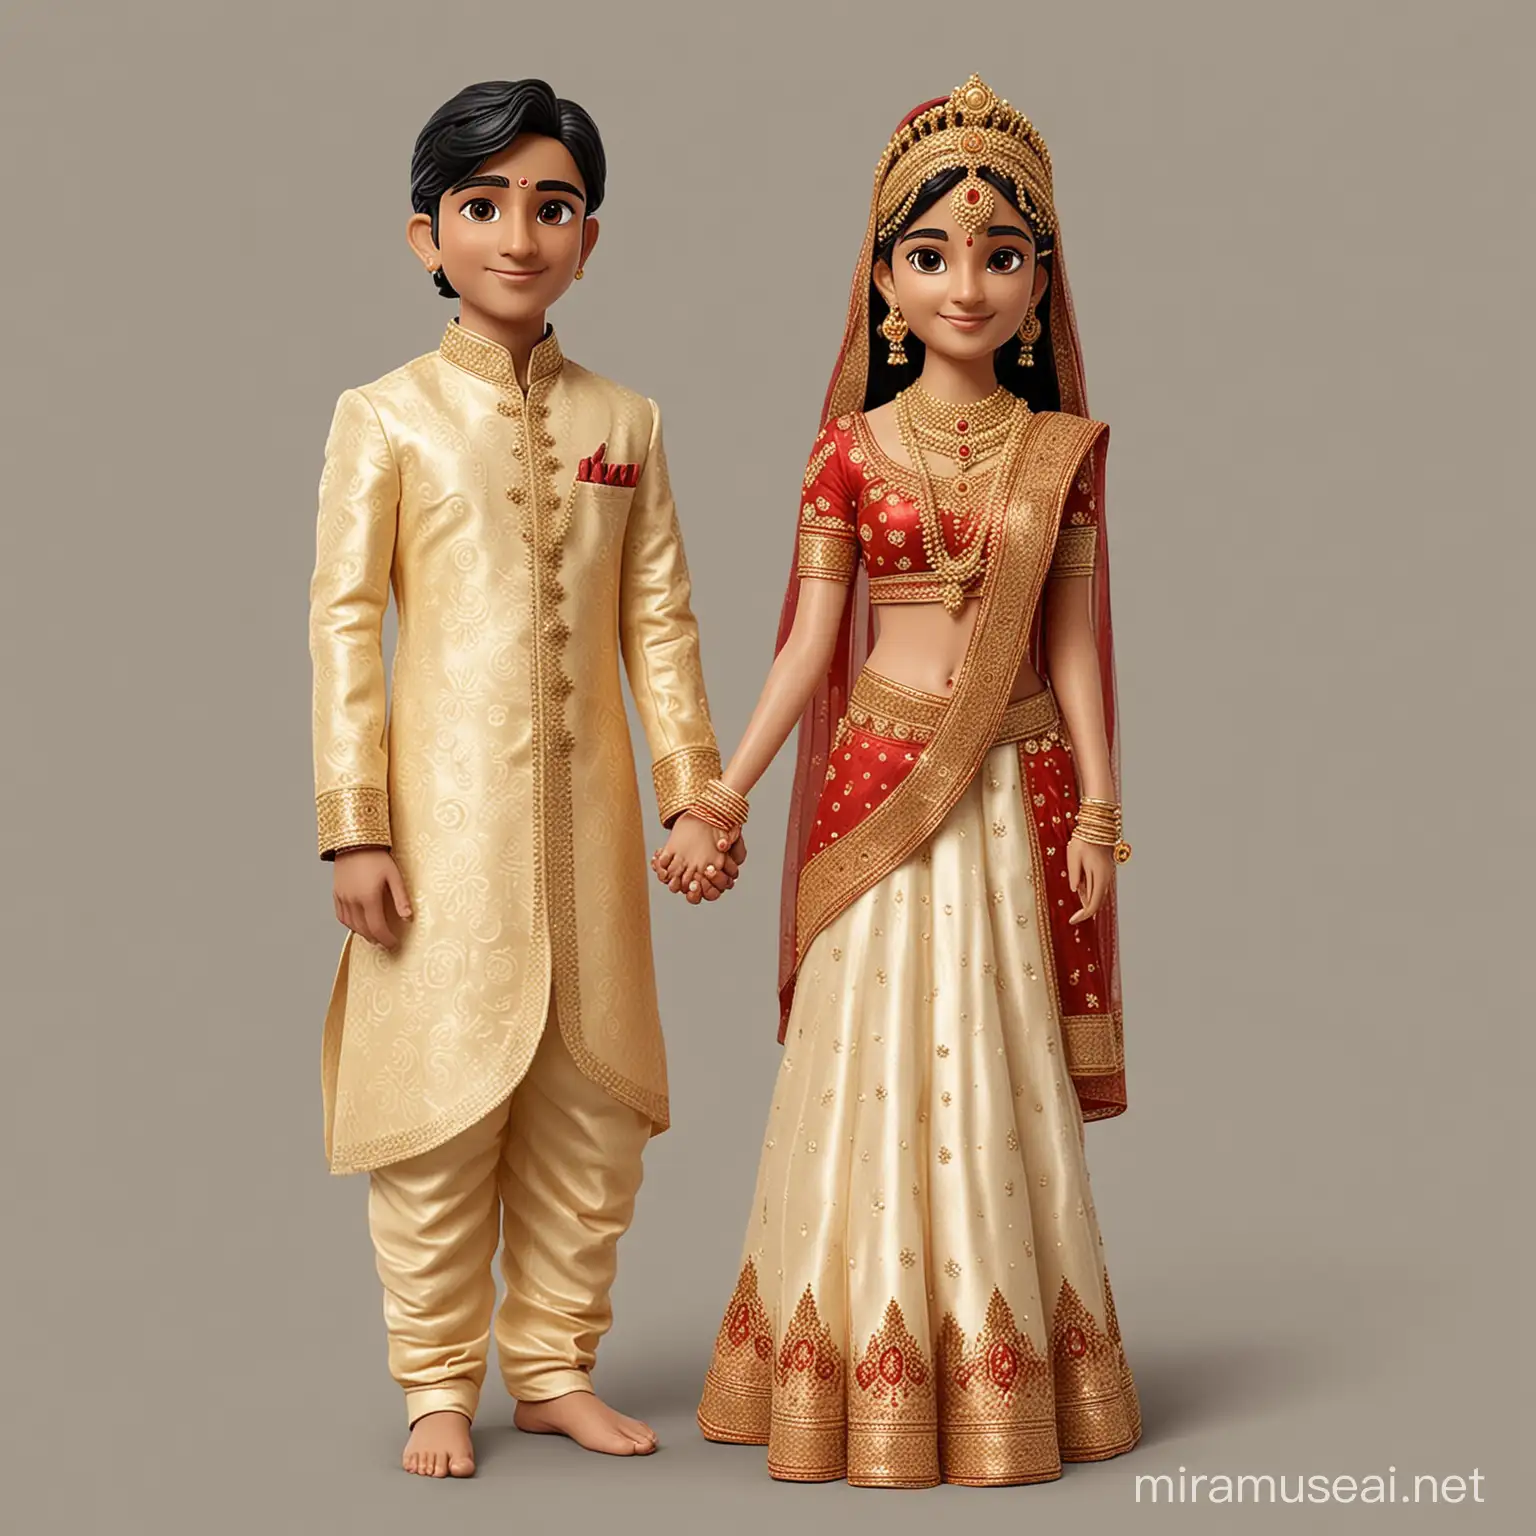 Radiant Indian Bride and Groom in Traditional Gold Attire Holding Hands